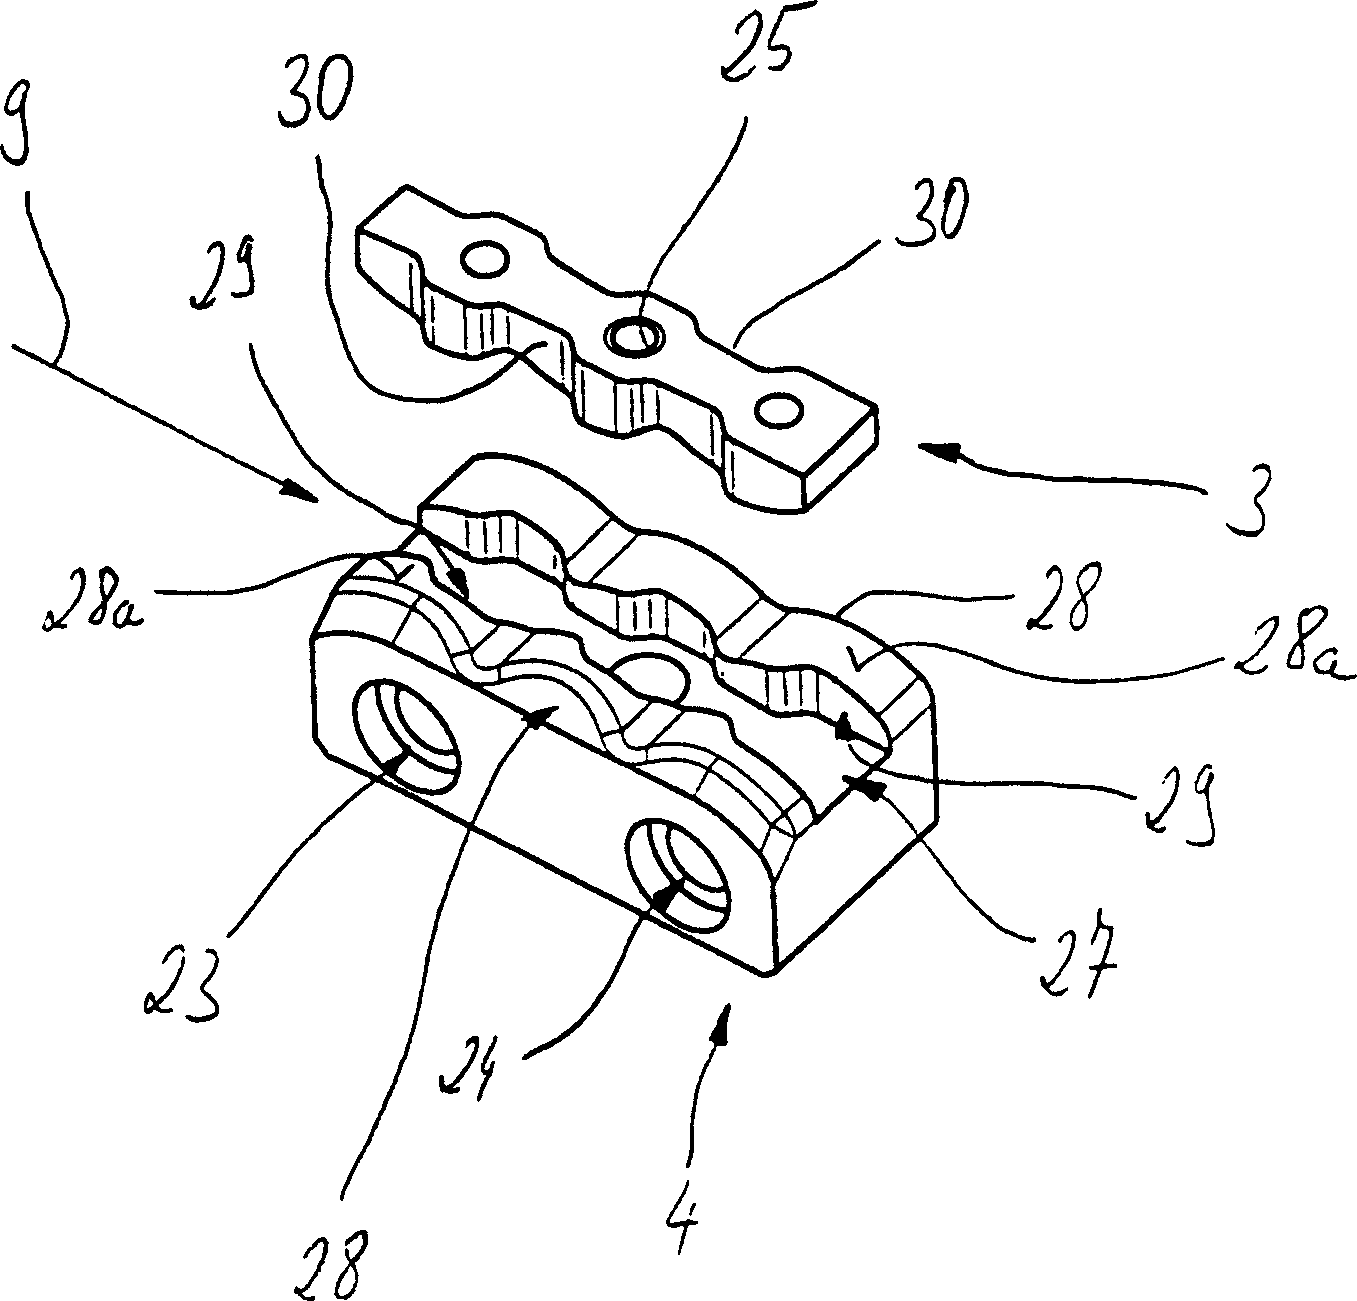 Punching/deforming tool for hundle-up device